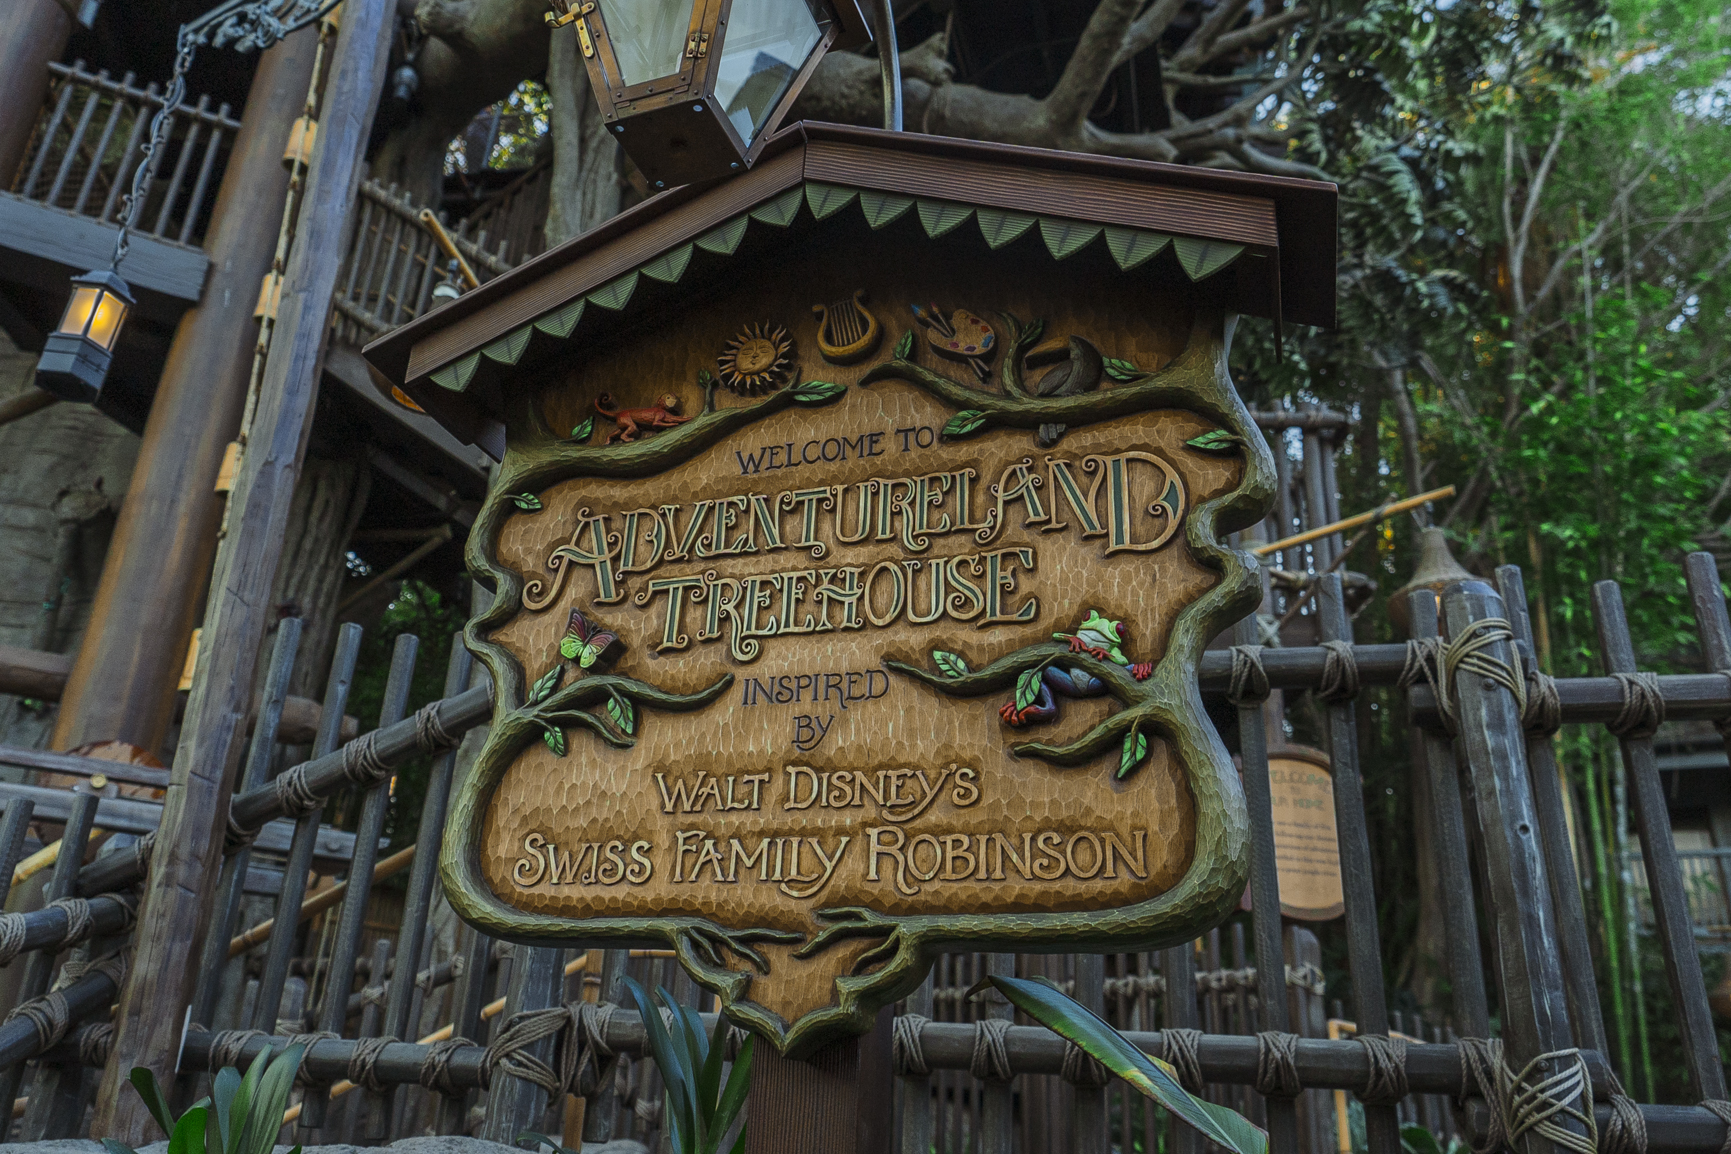 Paying tribute to the original treehouse that Walt Disney and his Imagineers built in 1962 for the movie “Swiss Family Robinson,” the Adventureland Treehouse inspired by Walt Disney’s Swiss Family Robinson will open in a fresh, new way Nov. 10, 2023, at Disneyland Park in Anaheim, Calif. The Adventureland Treehouse will showcase wondrous new environments created amongst the branches of a giant tree, where guests will once again enter by the giant waterwheel and follow the wood rope stairways up, up, up into the boughs. (Christian Thompson/Disneyland Resort)